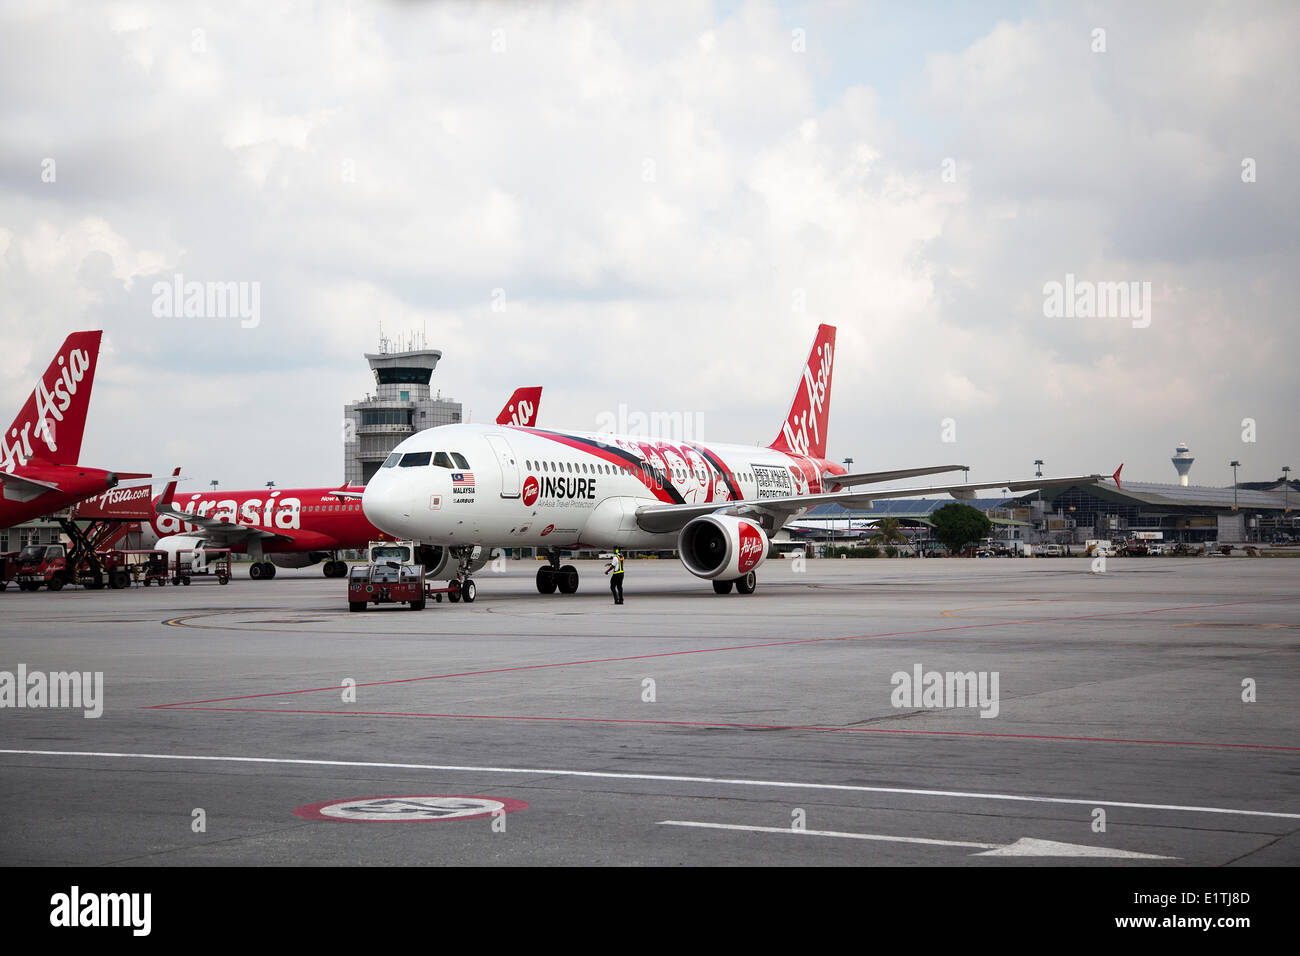 Air Asia planes at Kuala Lumpur International Airport LCCT, Malaysia, April 30, 2014. Air Asia is a Malaysian low-cost airline operating across the whole Asia. (CTK Photo/Karel Picha) Stock Photo